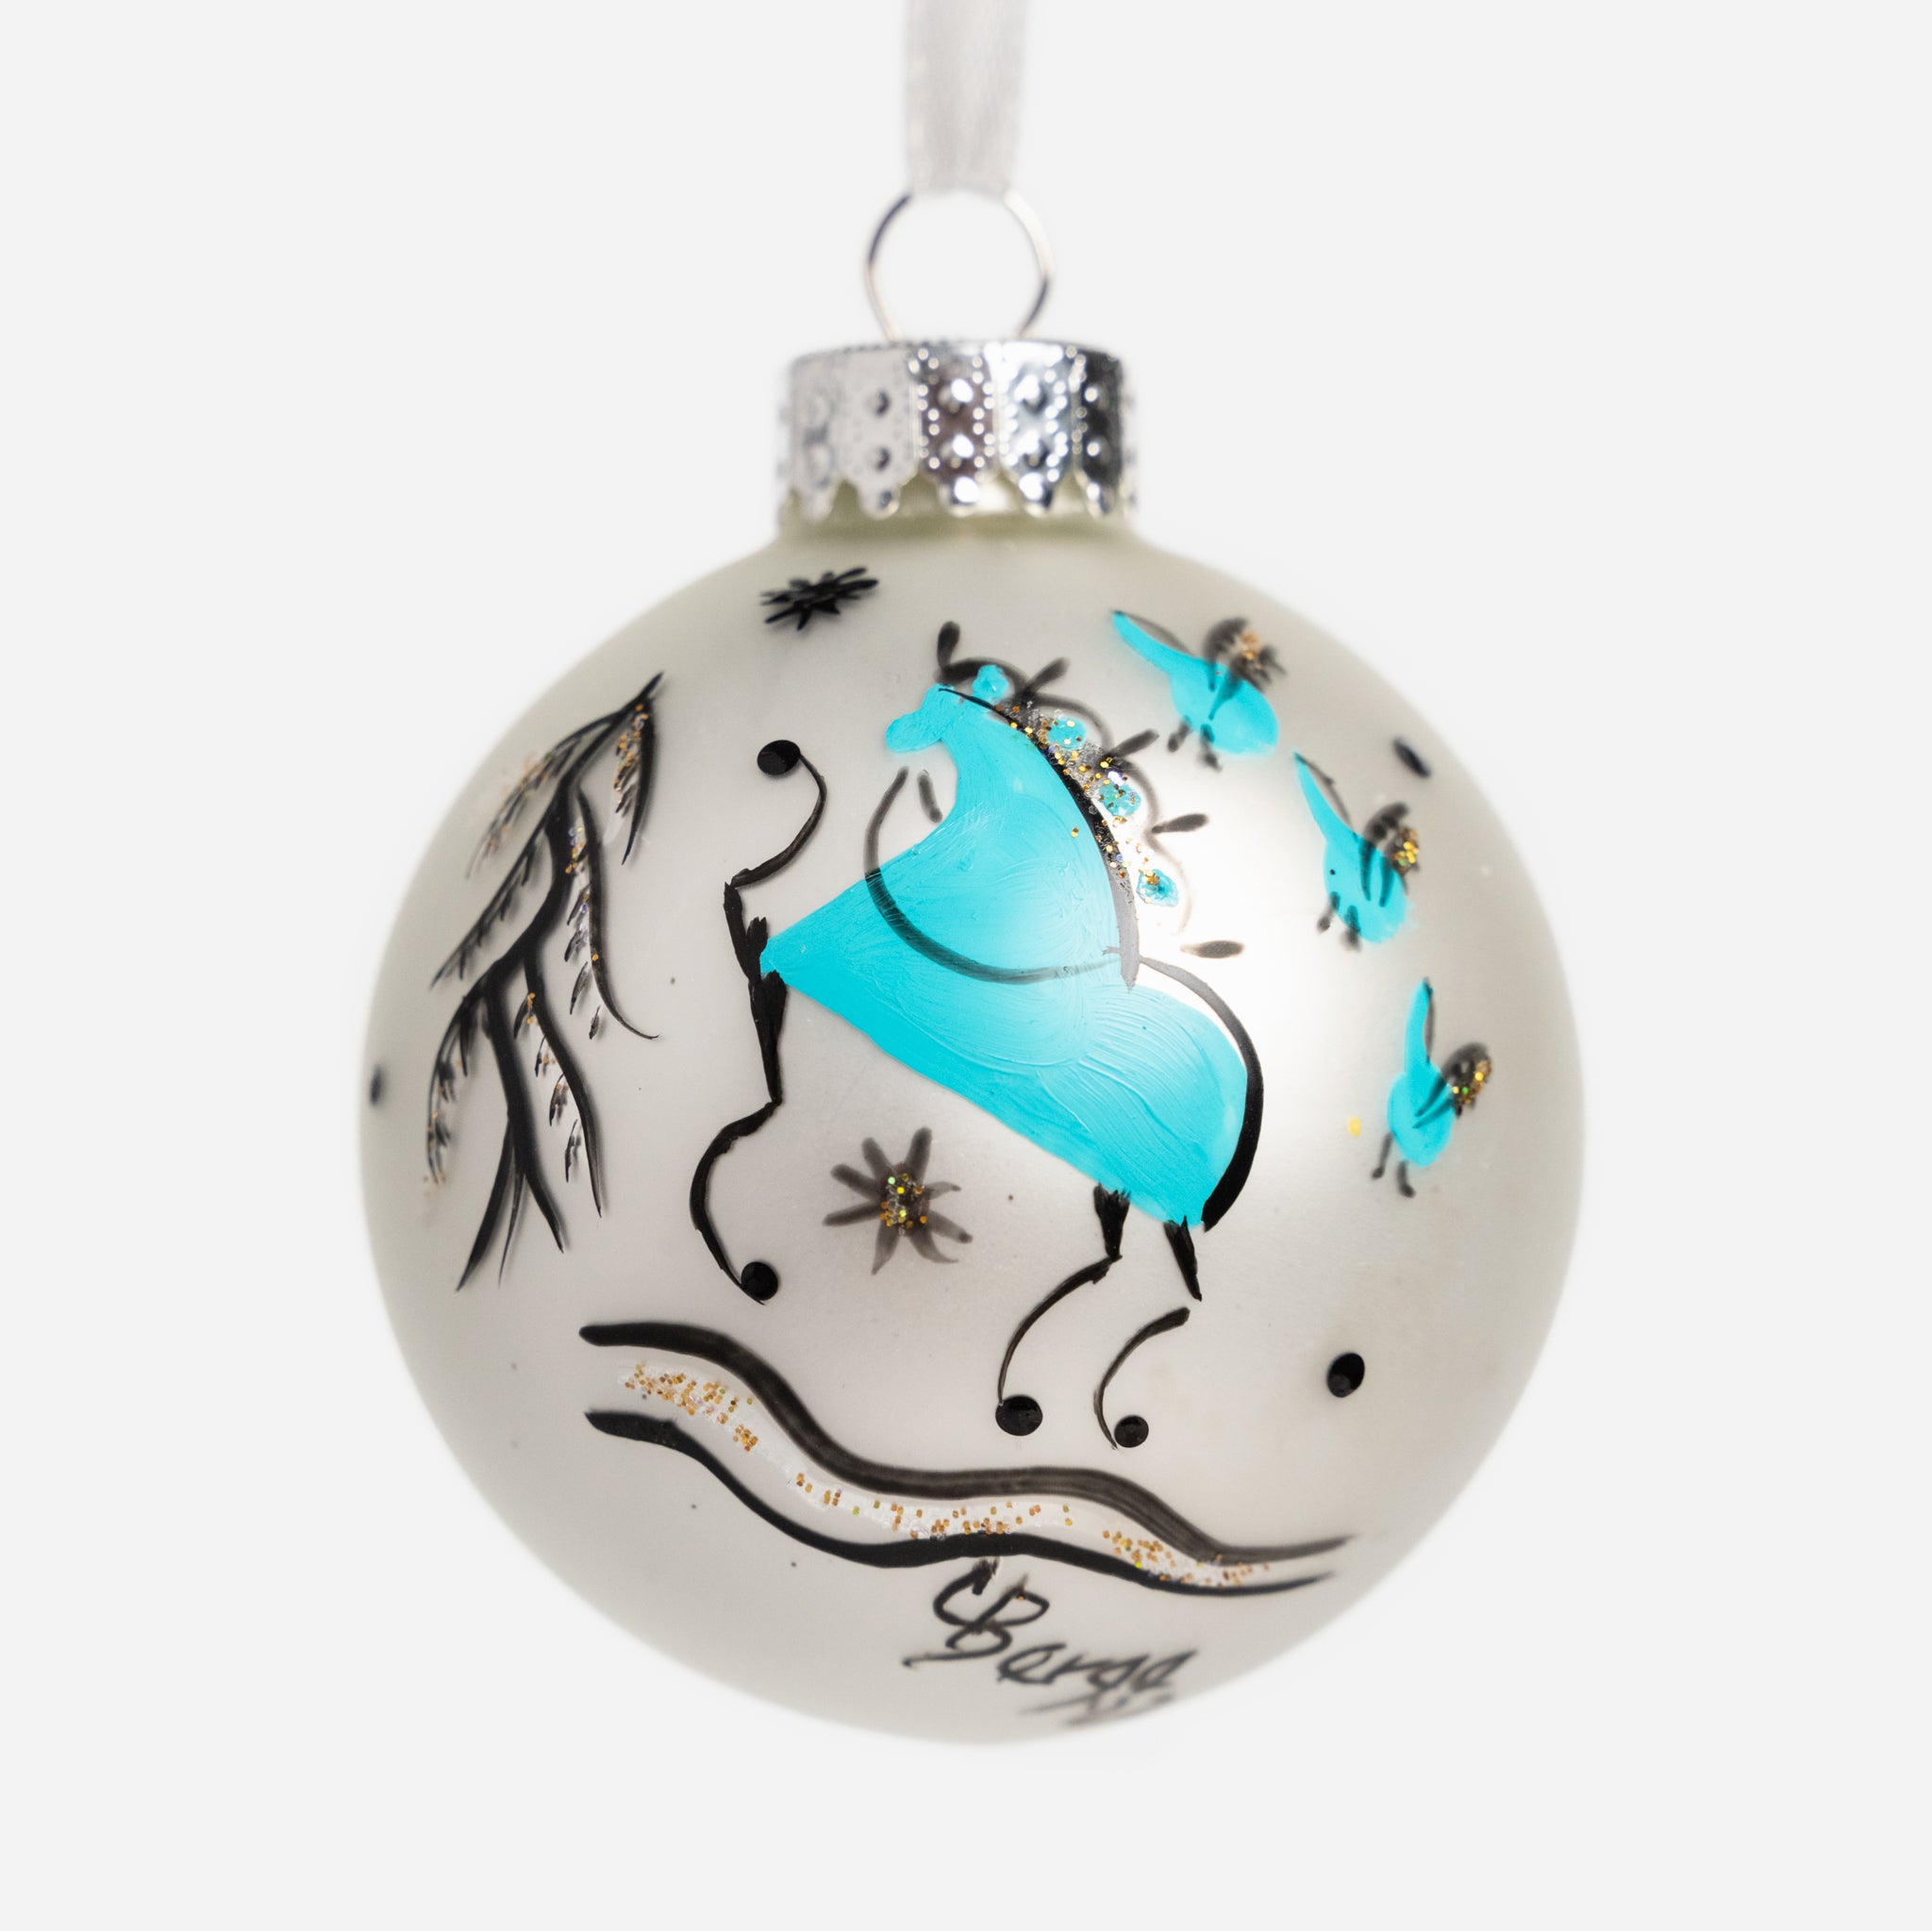 Hand Painted Ornament with Mezen Design by Coral Berge